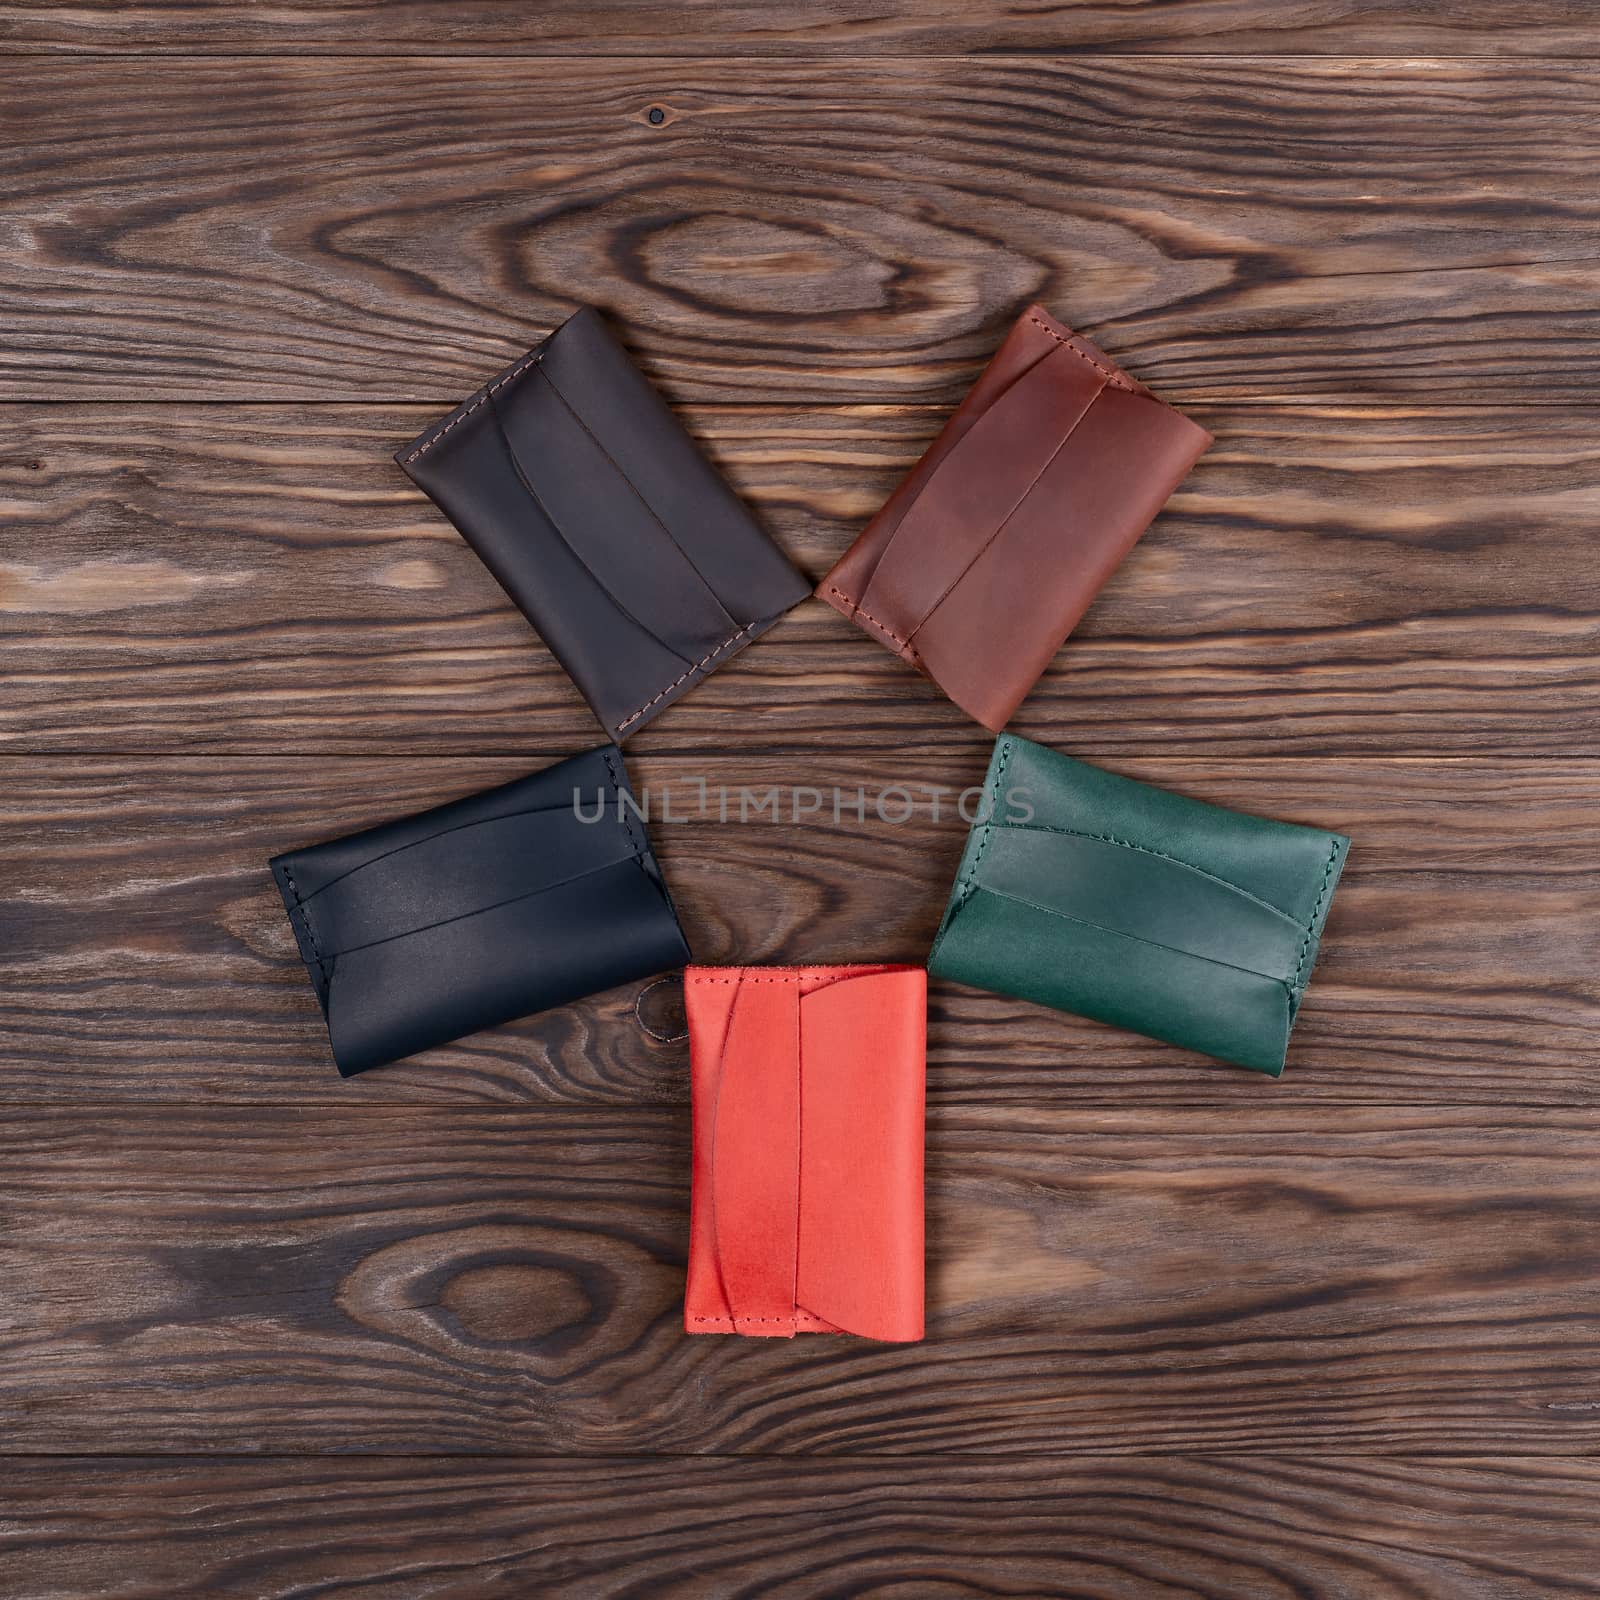 Flat lay photo of five different colour handmade leather one pocket cardholders. Red, black, blown, ginger and green colors. Stock photo on wooden background. by alexsdriver